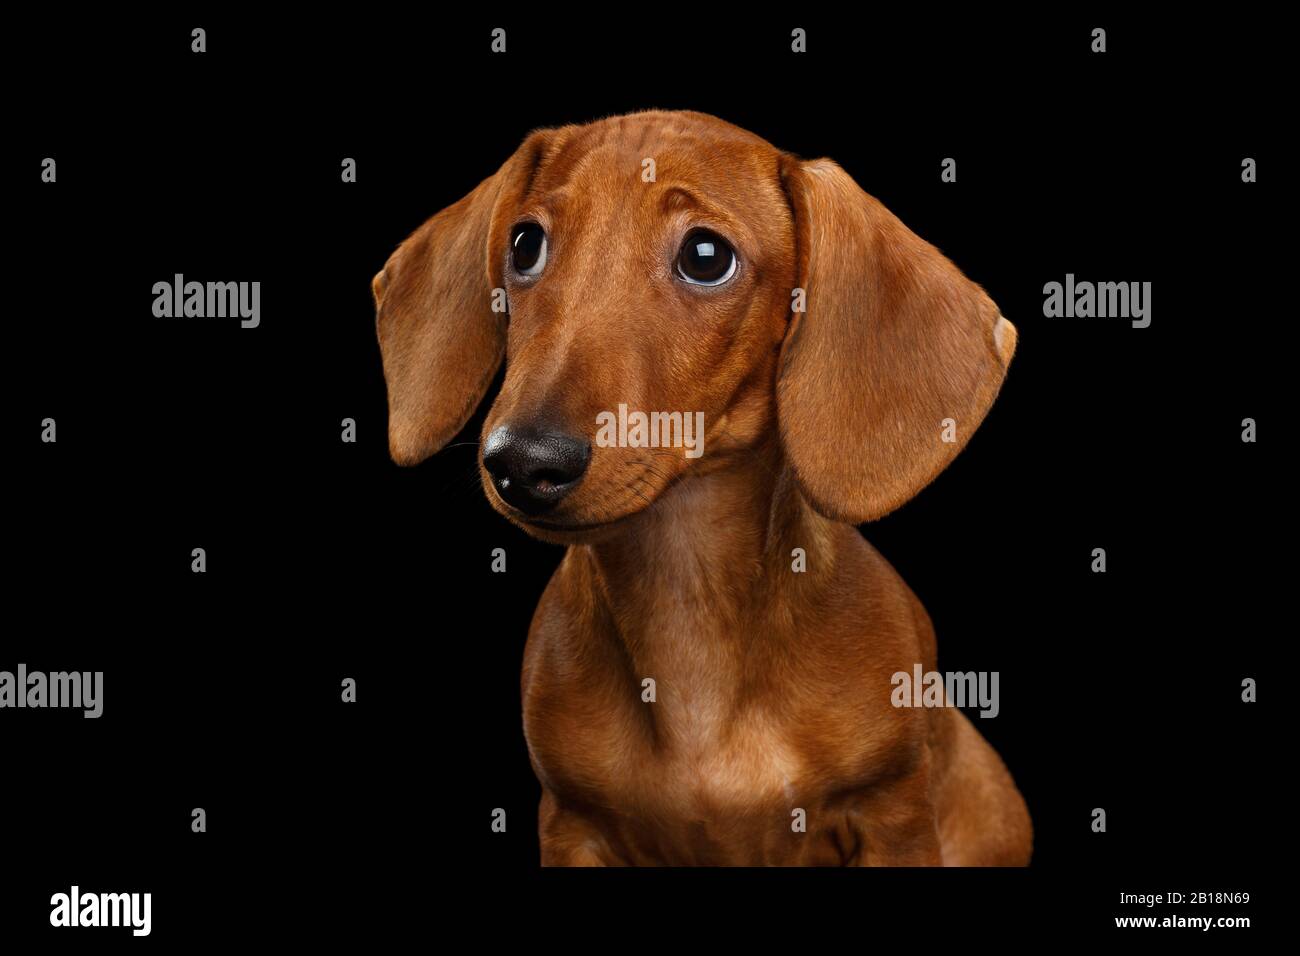 Cute Portrait of Smooth Haired Brown Dachshund Dog Sad Looking up Isolated on Black Background Stock Photo